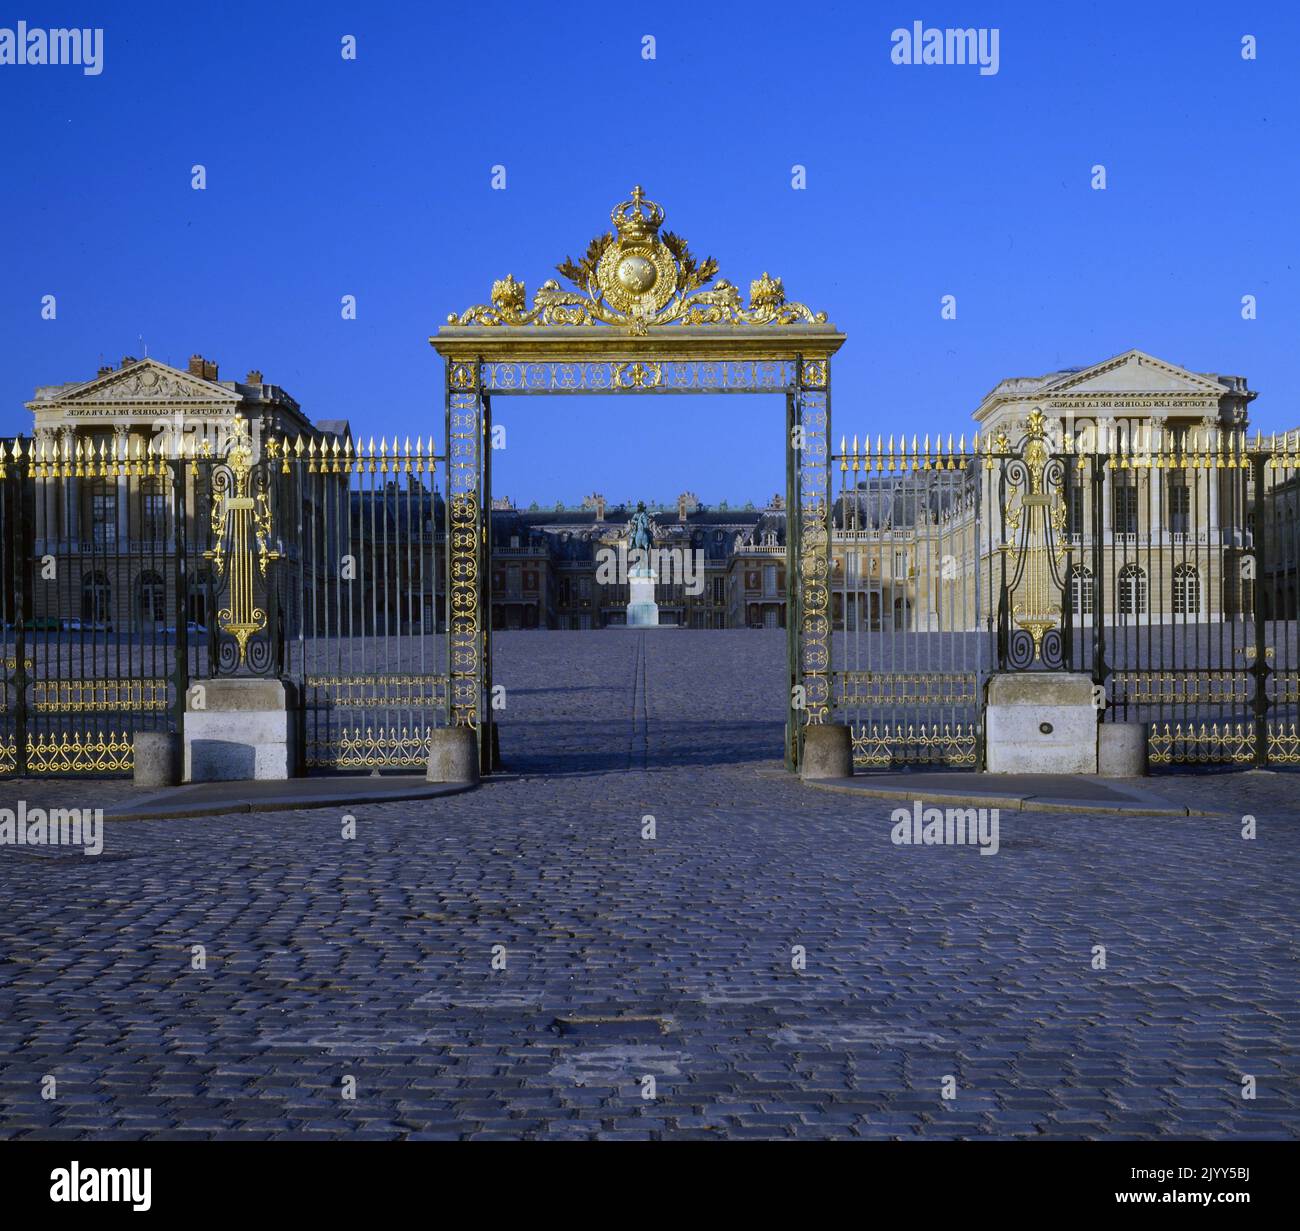 Gilded gates to the Palace of Versailles. Versailles was a royal chateau in the Ile-de-France region of France. Versailles was the seat of political power in the Kingdom of France from 1682, when King Louis XIV moved the royal court from Paris, until the royal family was forced to return to the capital in October 1789, within three months after the beginning of the French Revolution Stock Photo